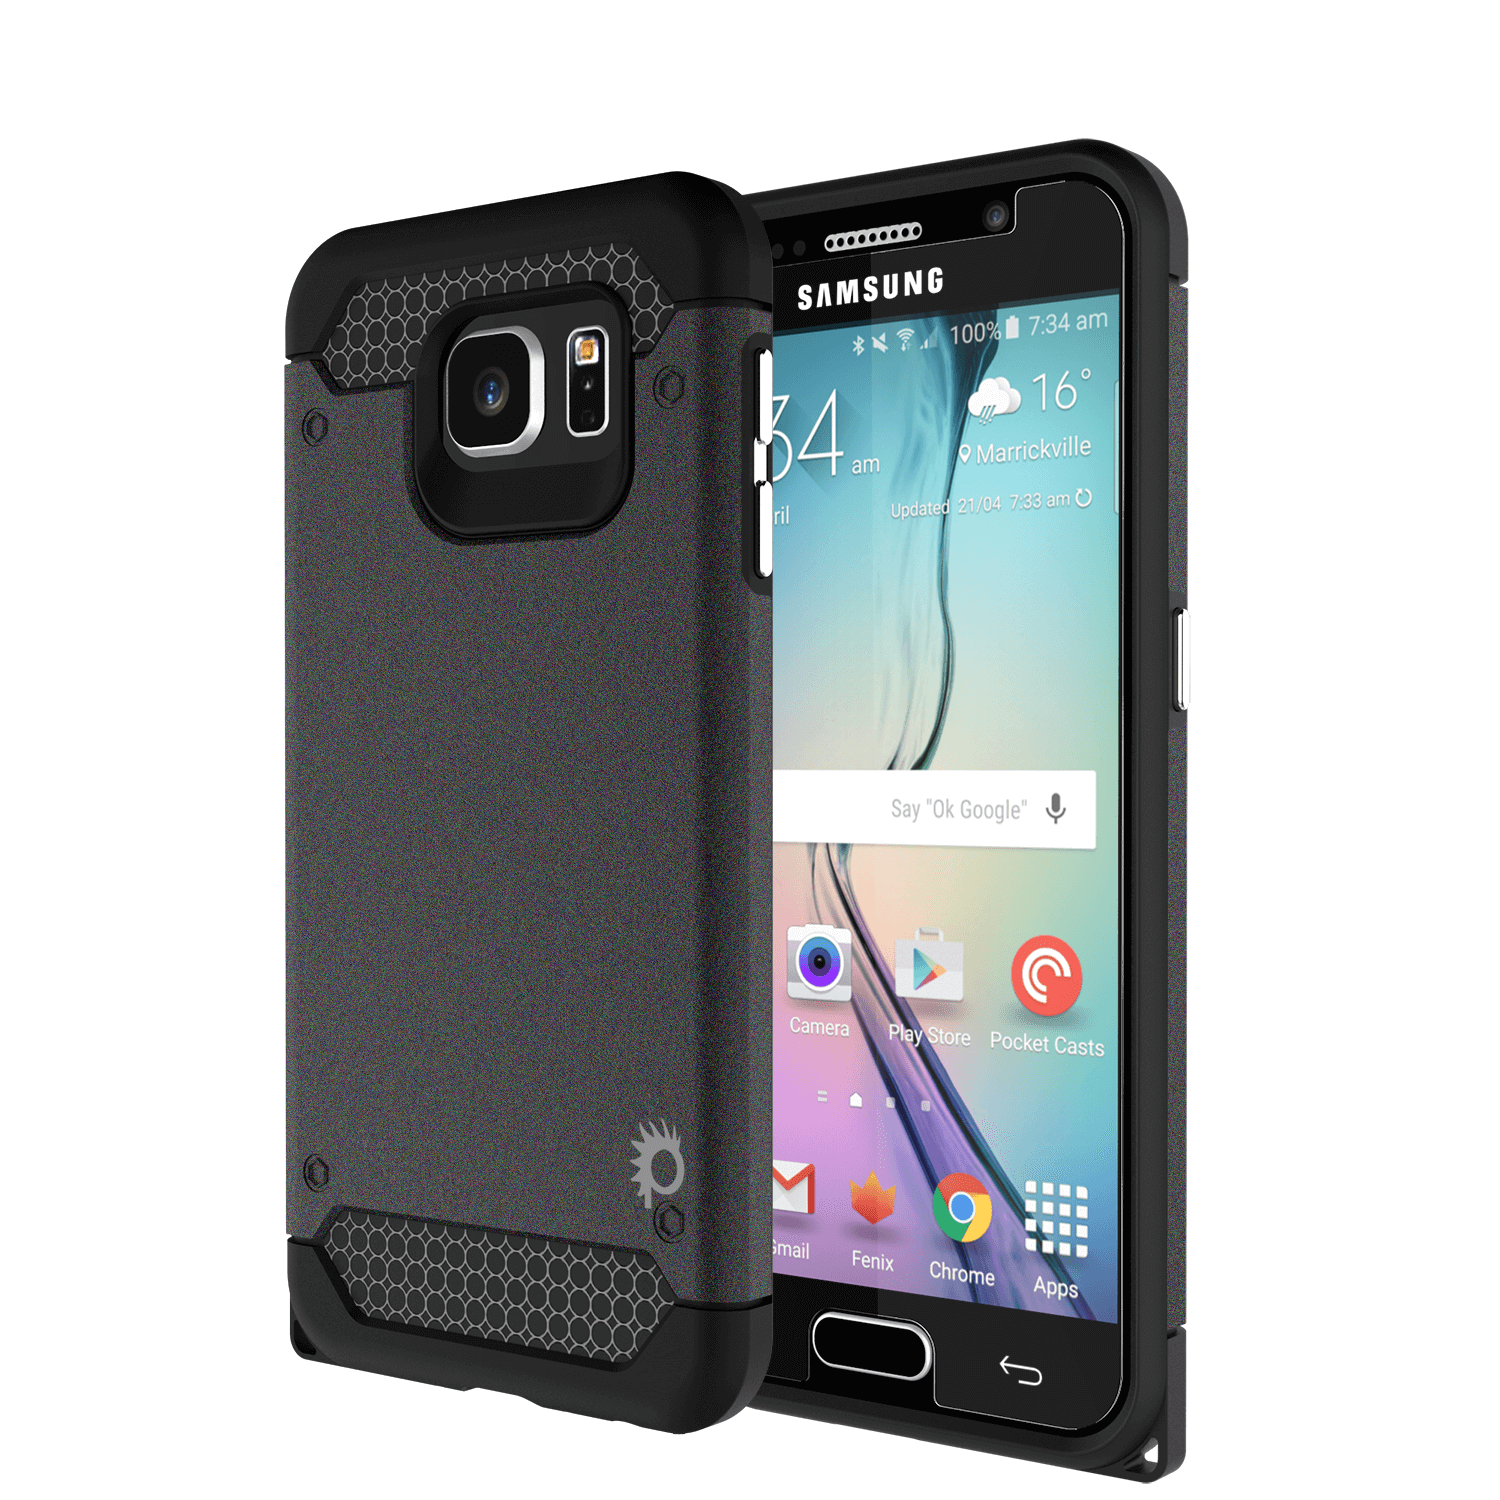 Galaxy s6 Case PunkCase Galactic Black Series Slim Armor Soft Cover Case w/ Tempered Glass